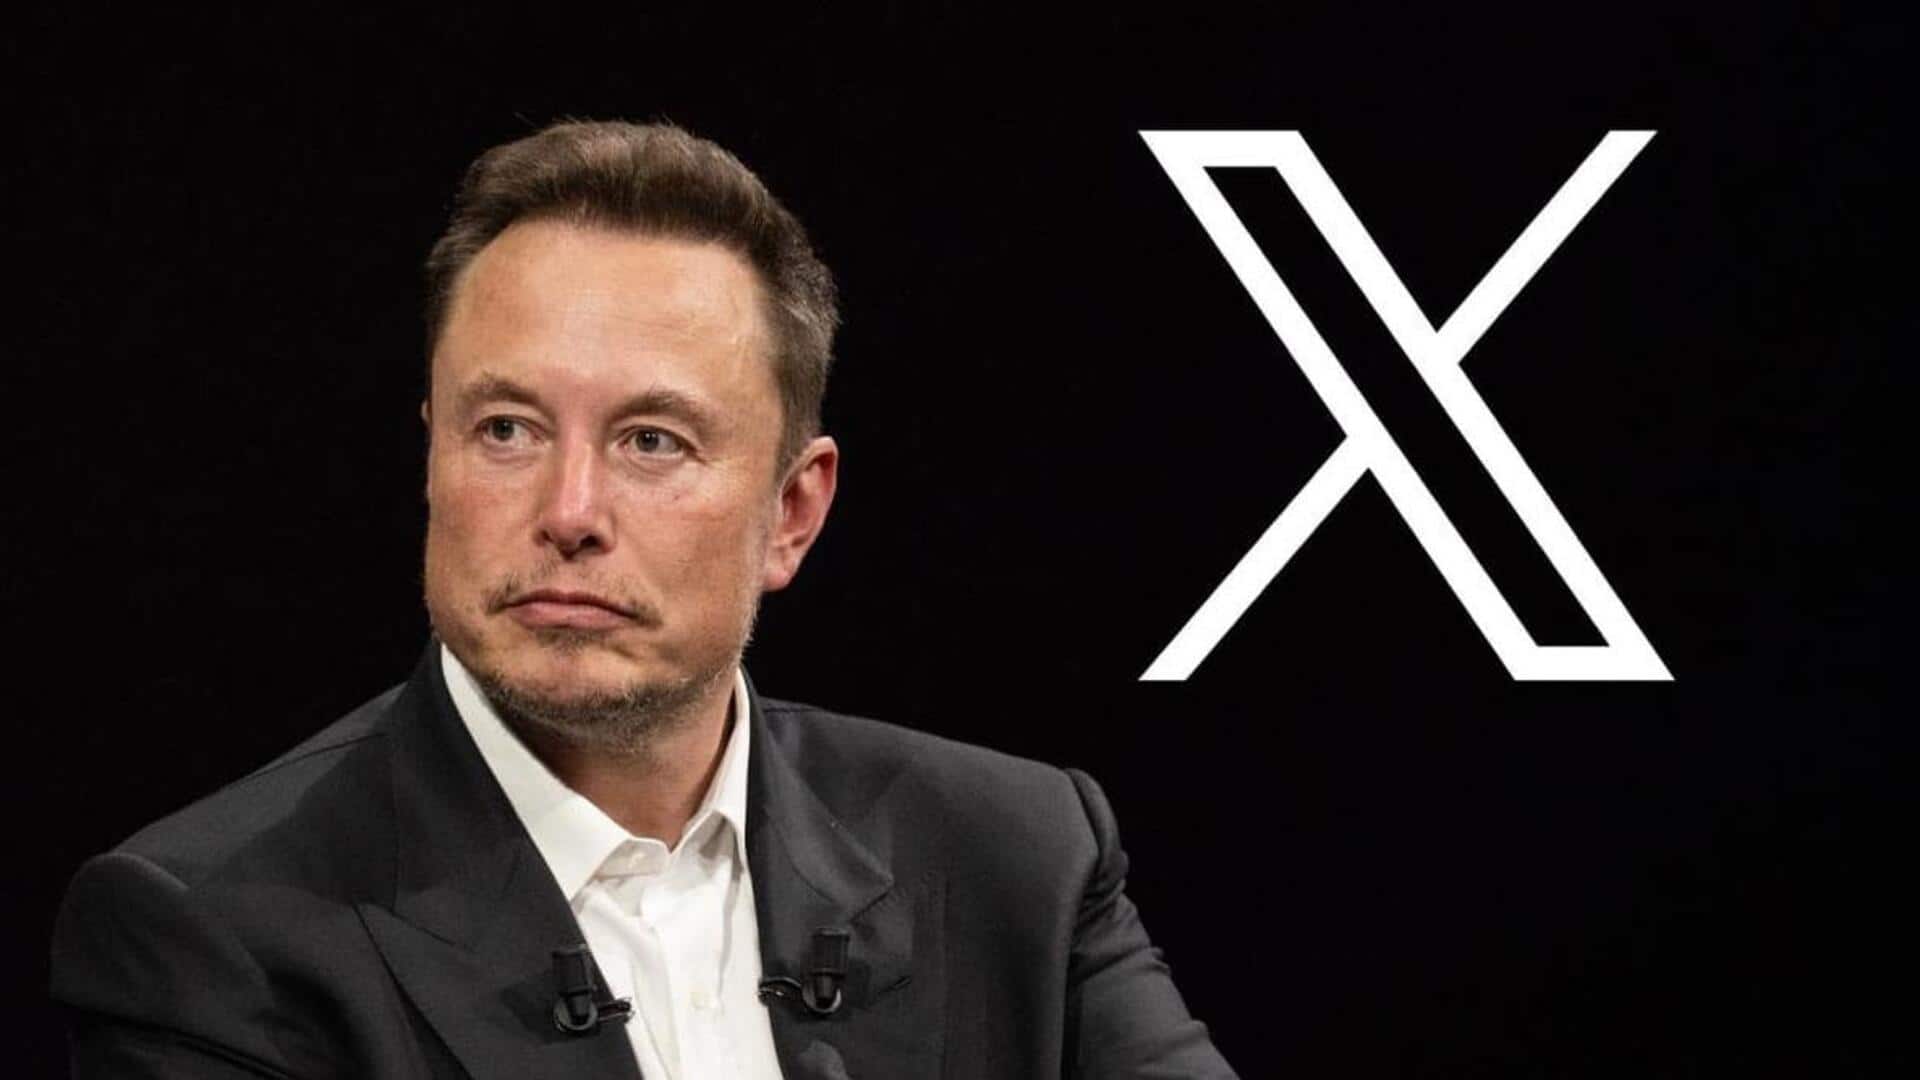 Why Elon Musk may remove X from Europe